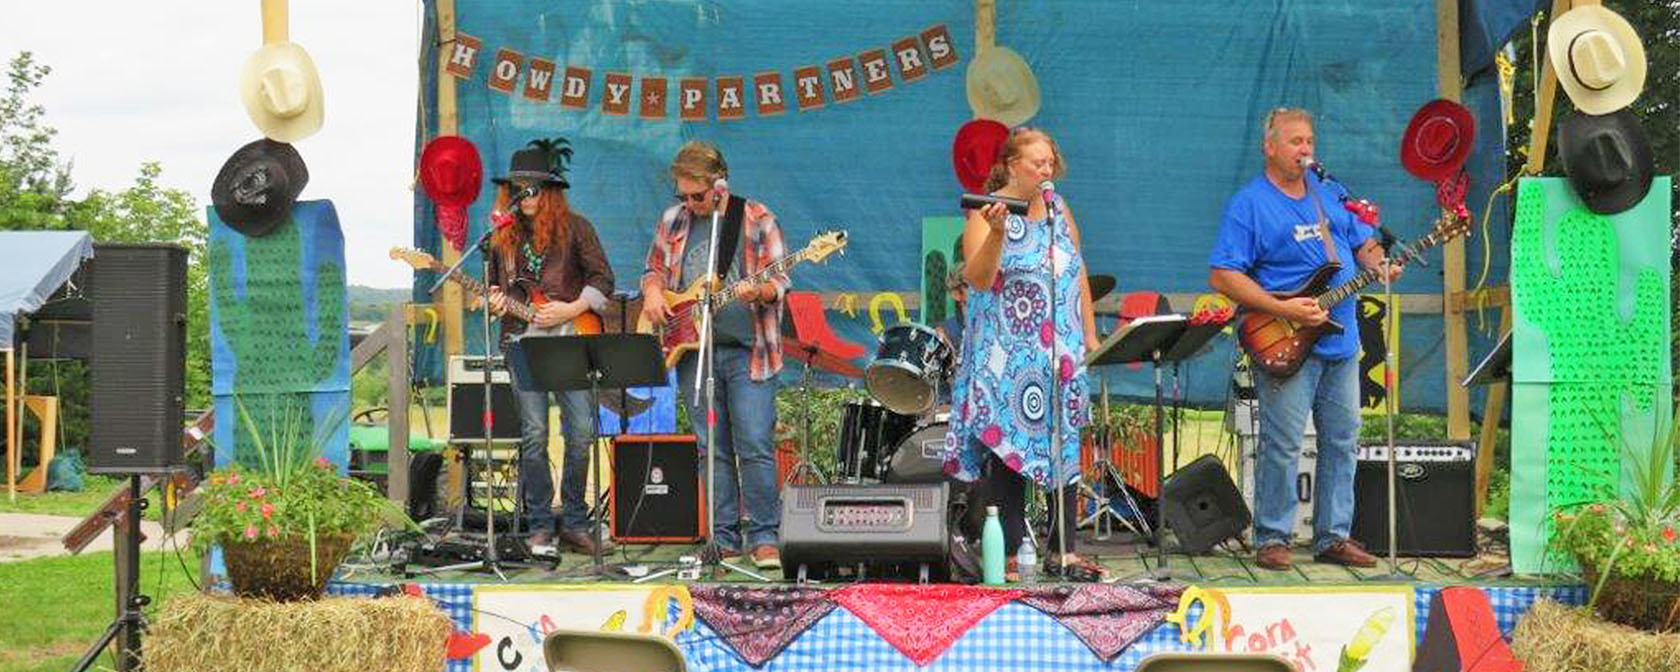 band members perform on a decorated stage